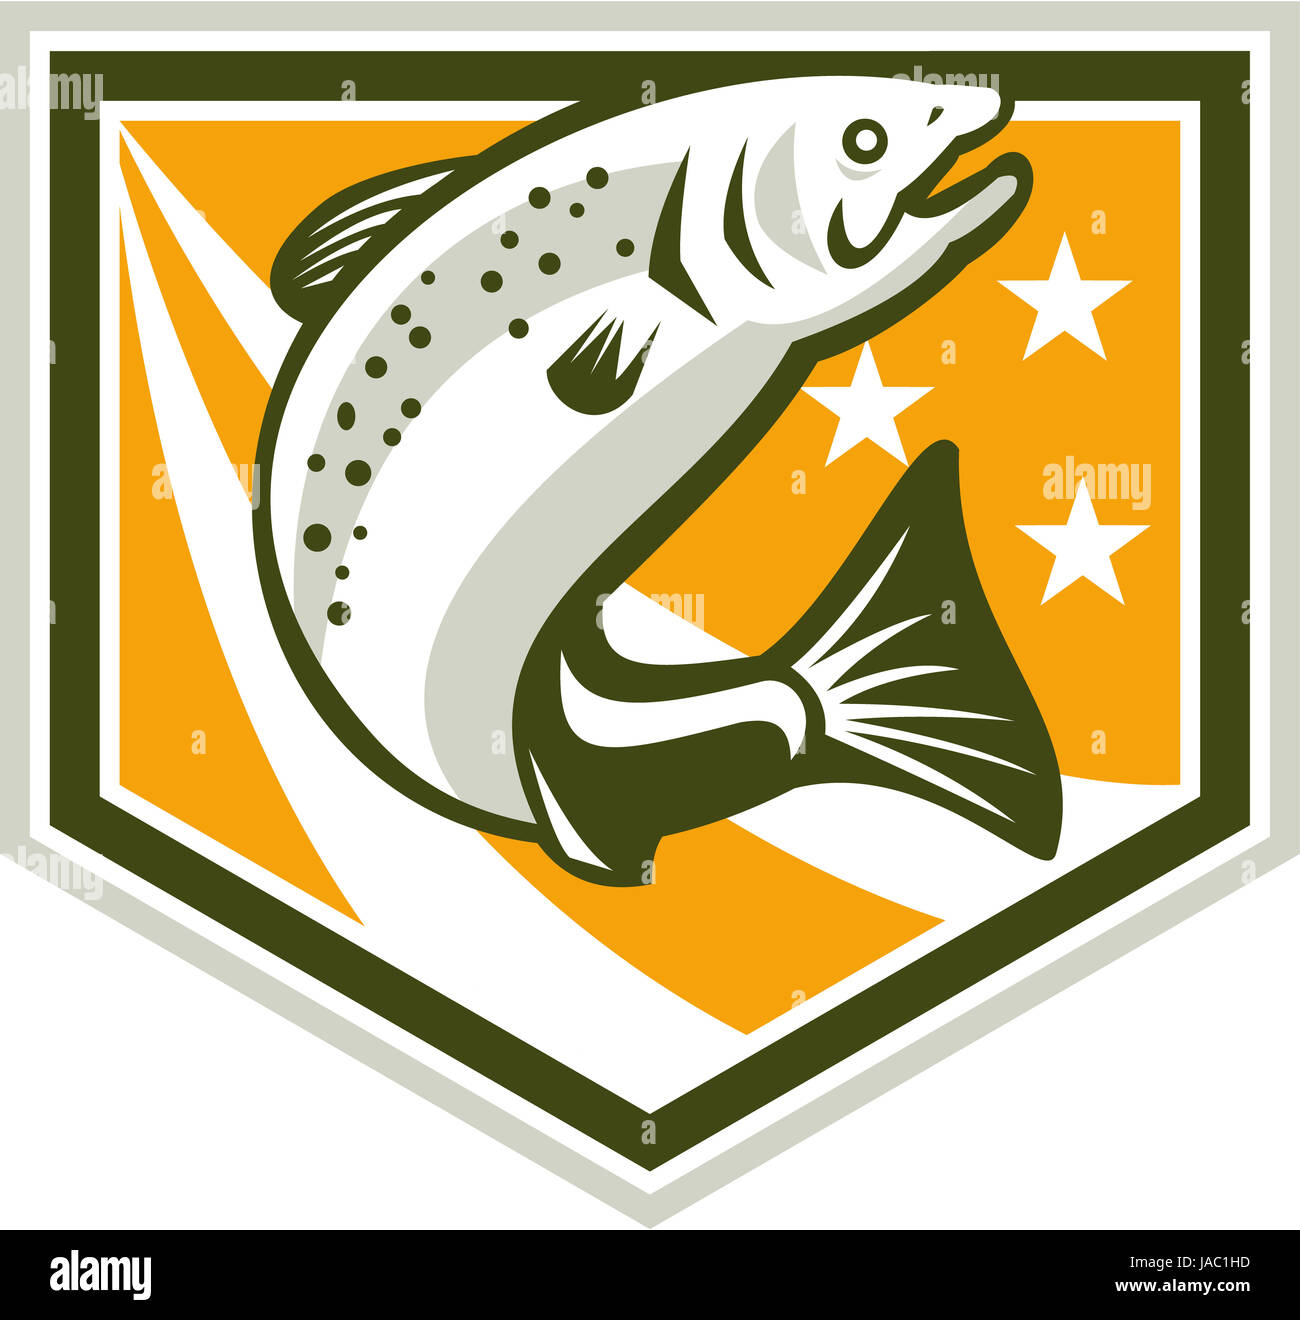 Illustration of a trout fish jumping set inside shield with stars and stripes marks done in retro style Stock Photo